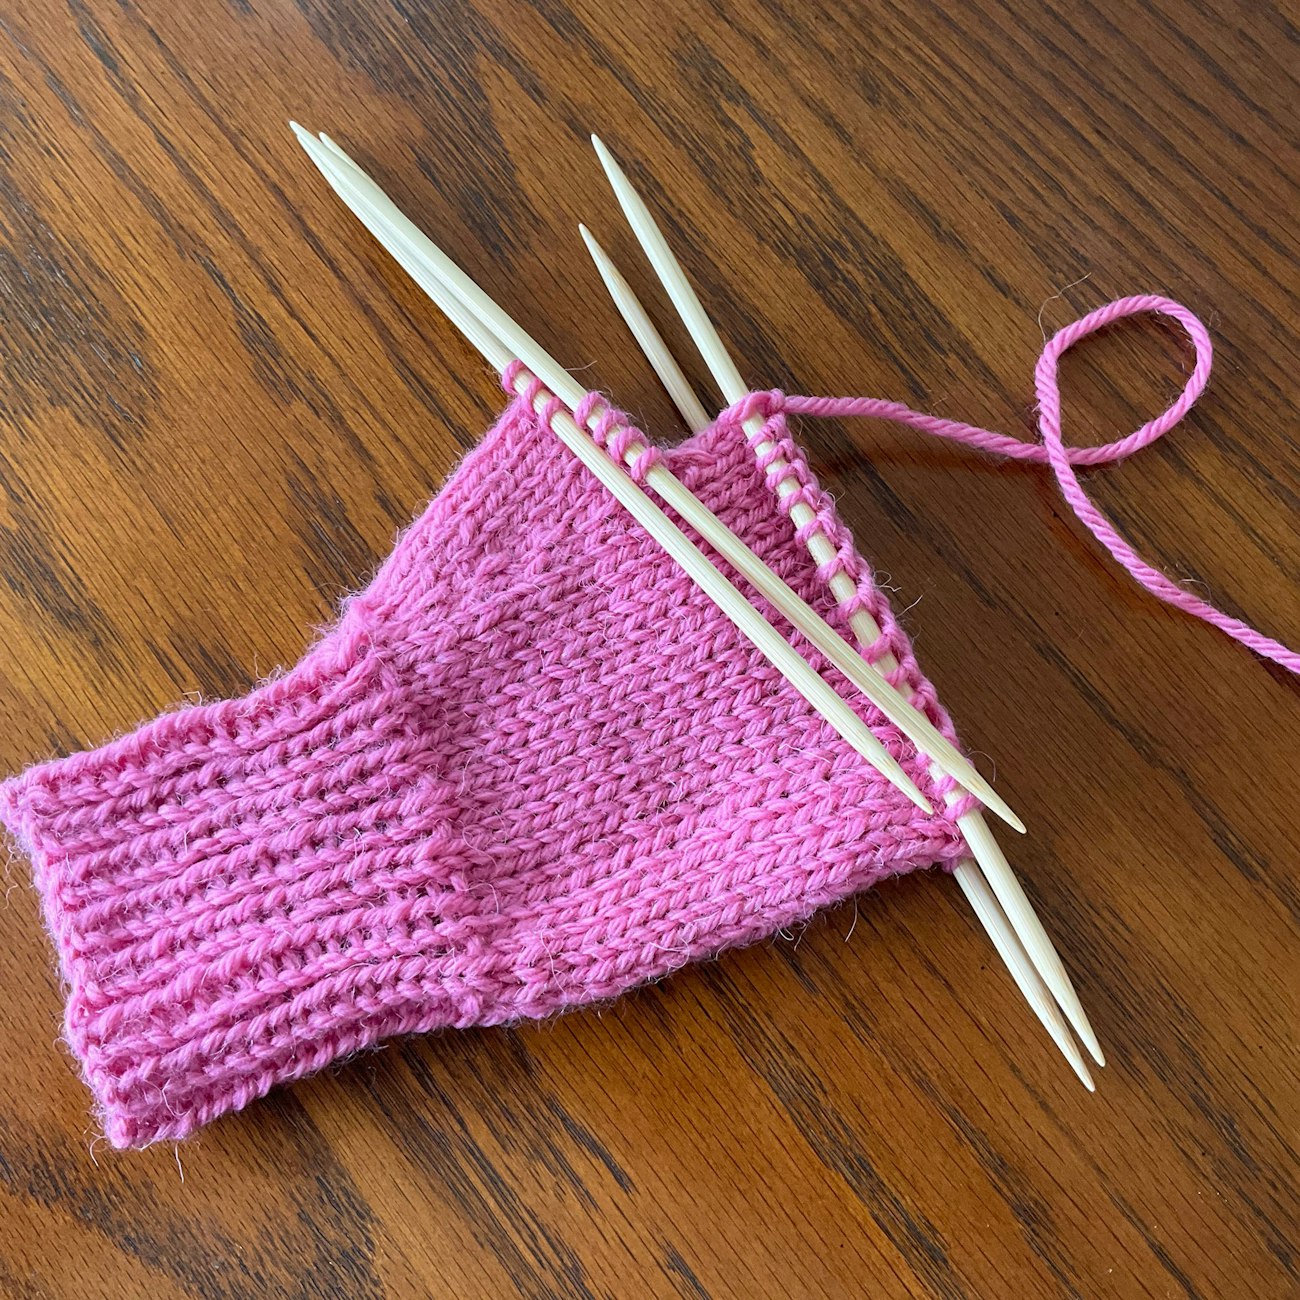 Pink mitten in process on double-pointed knitting needles